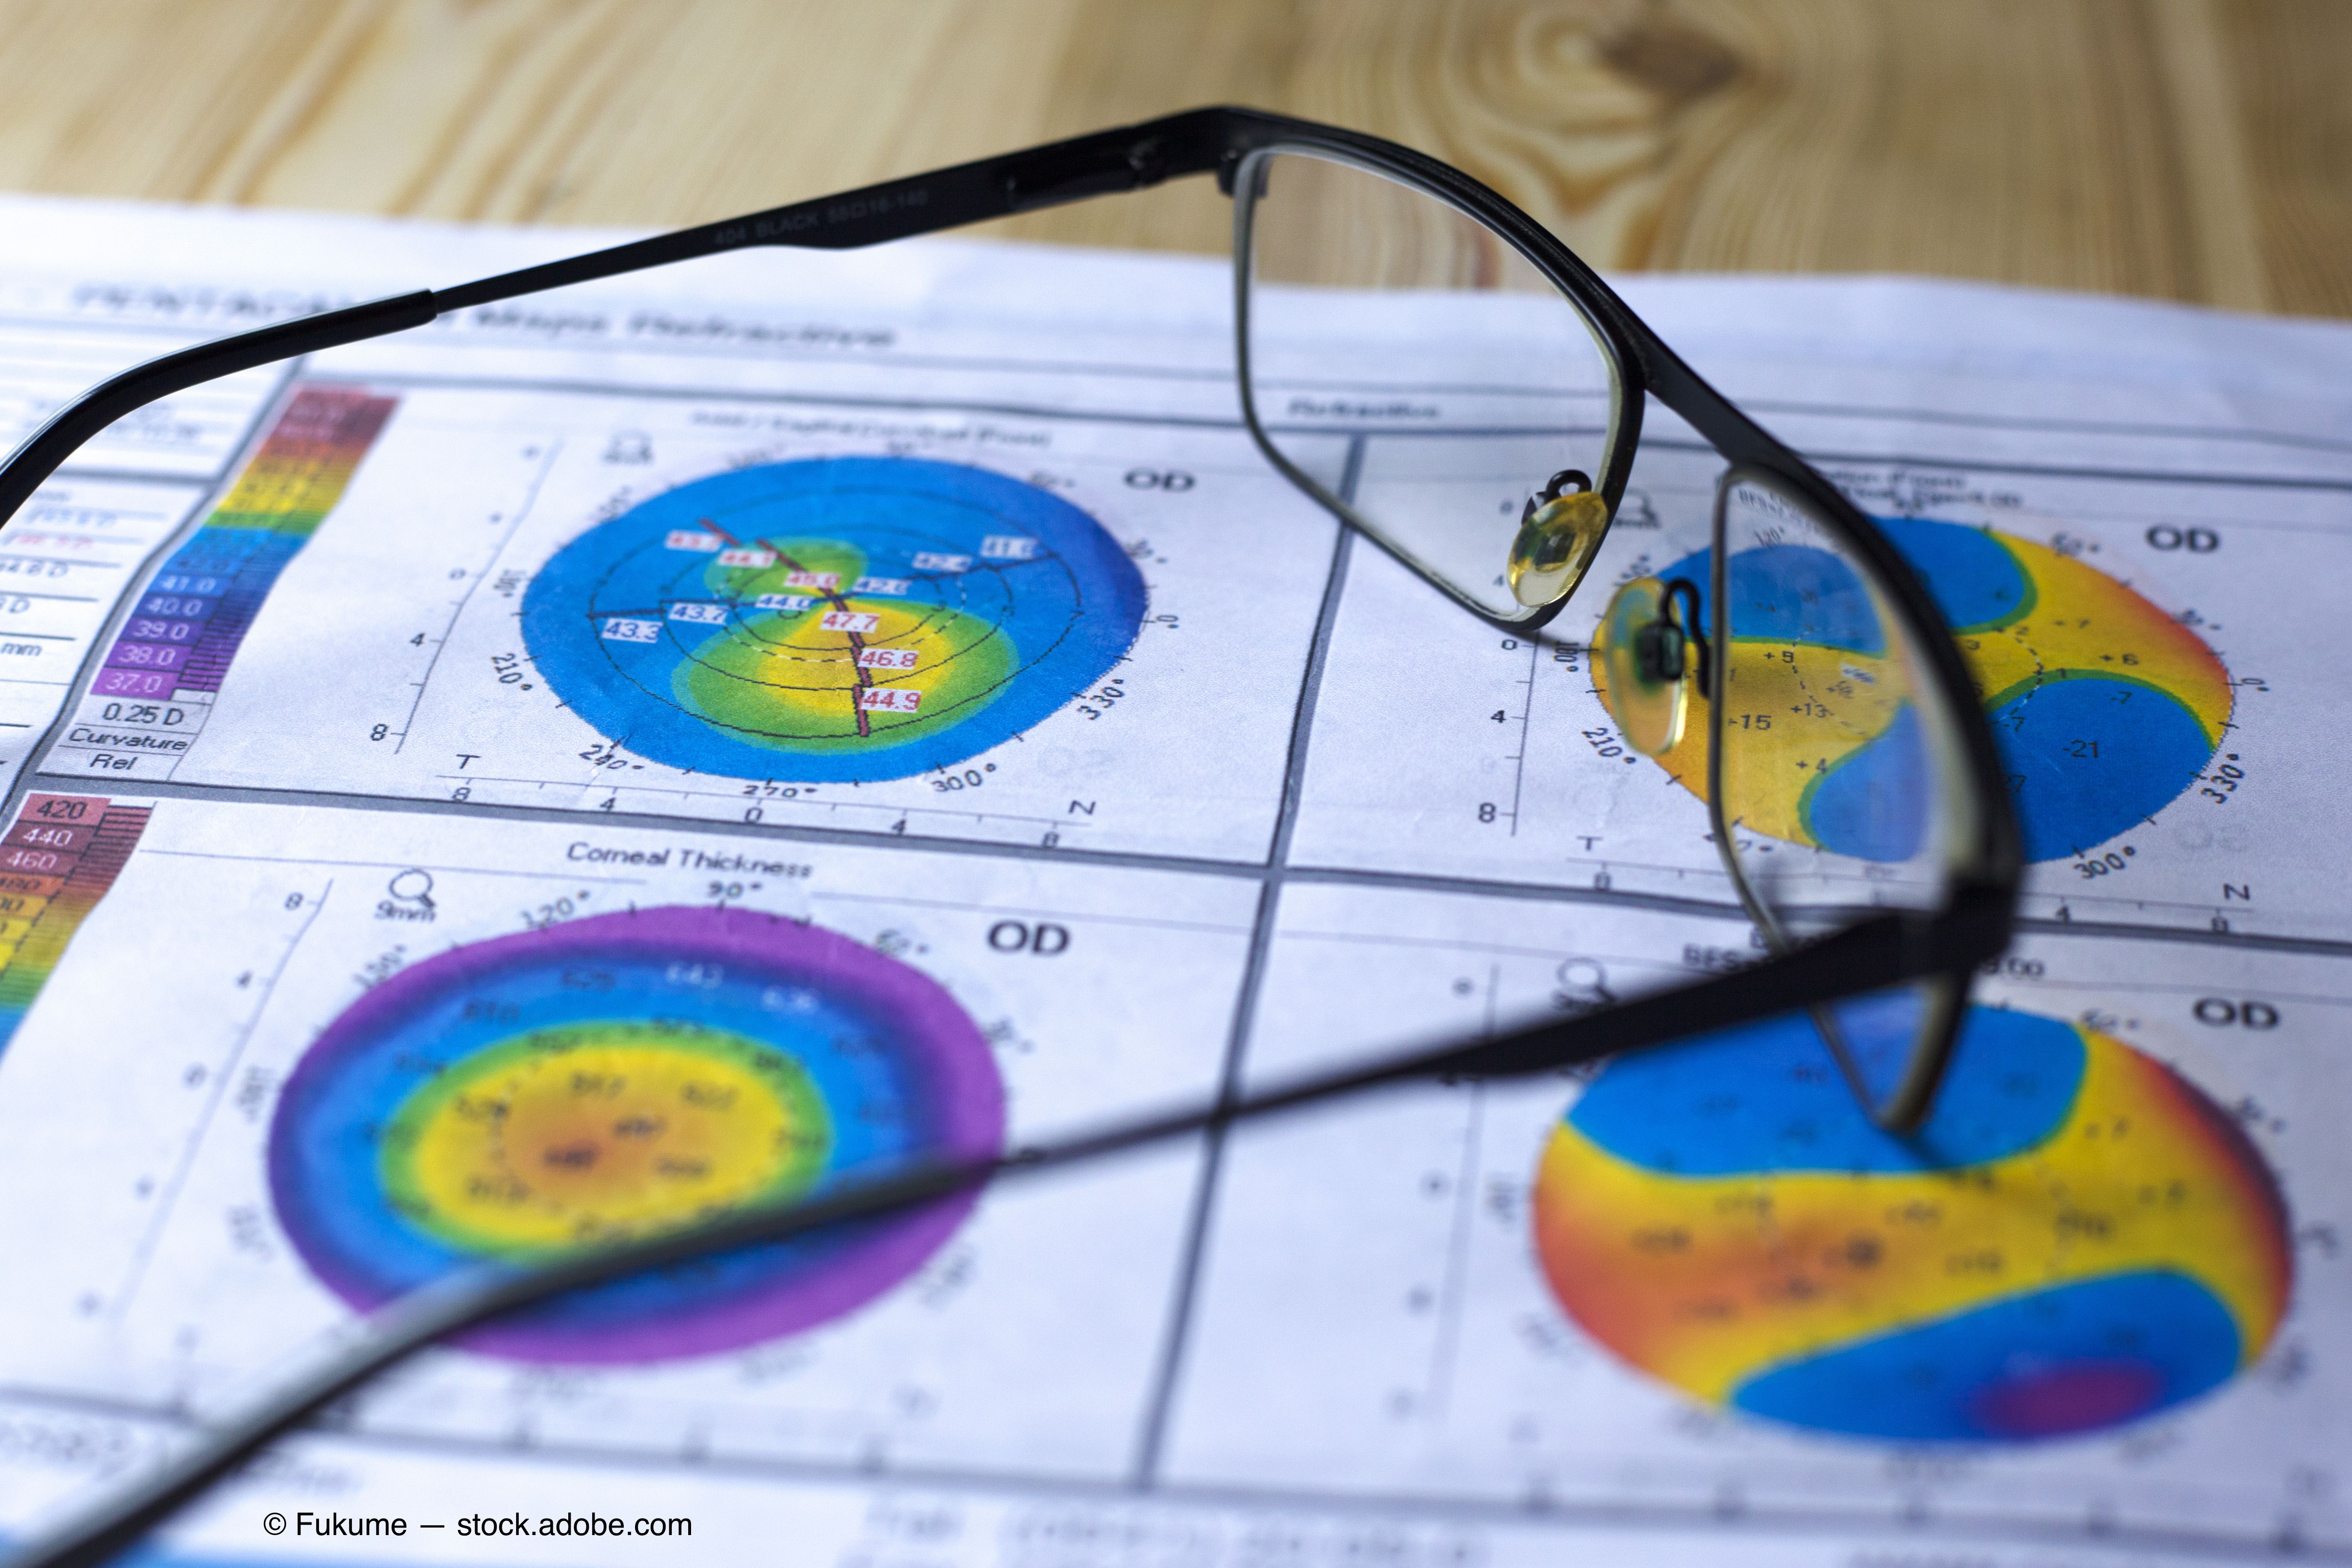 Glasses sitting on a sheet of paper with colorful images of a cornea topography